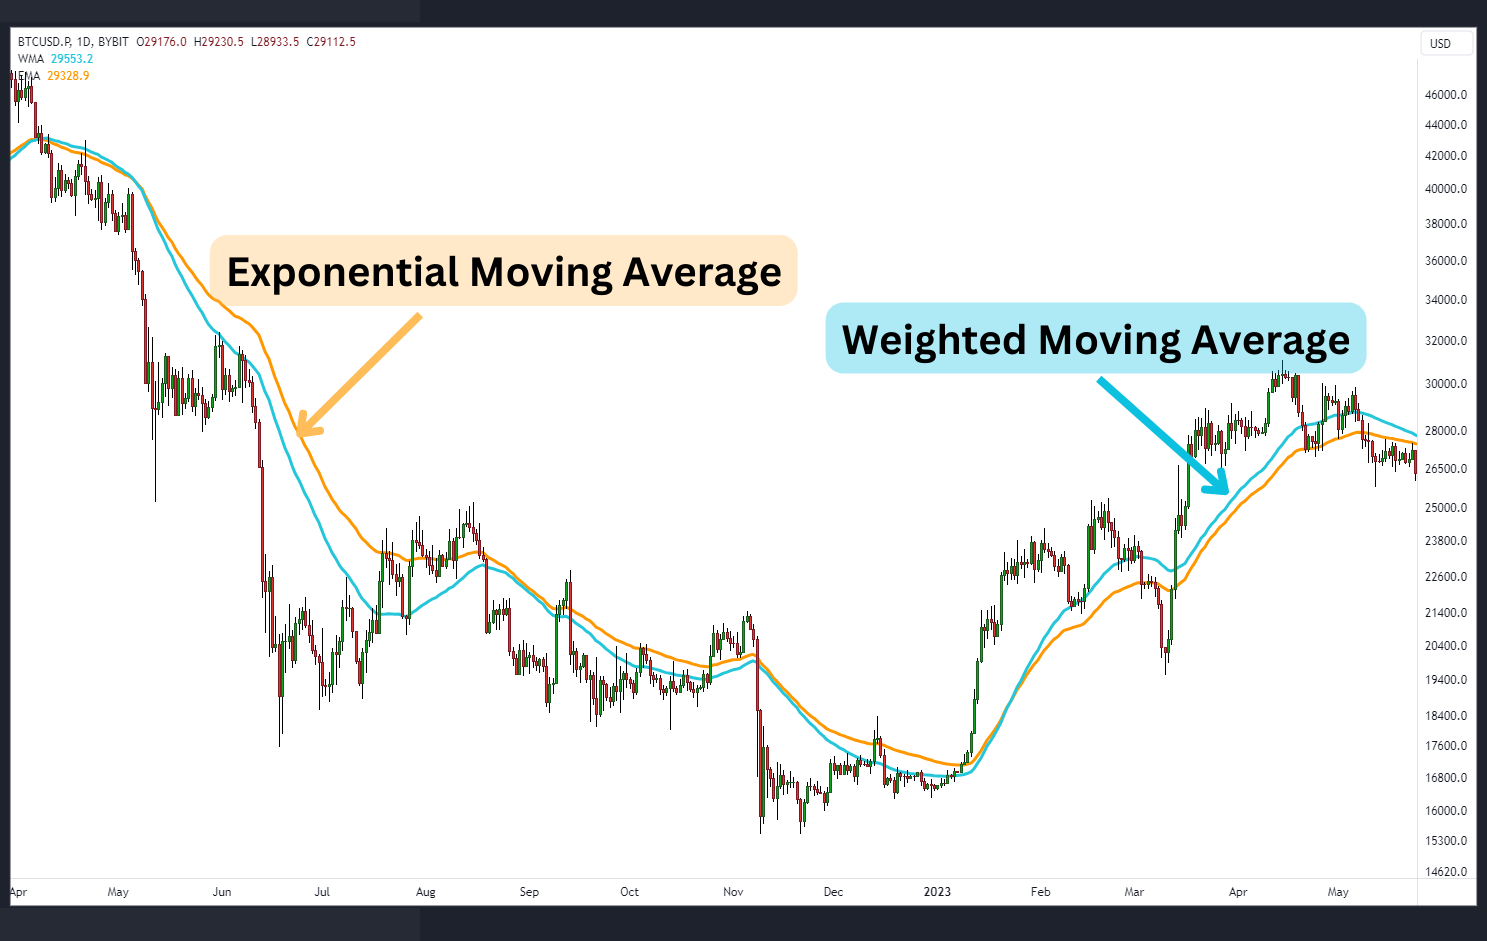 Weighted Moving Average (WMA) vs. Exponential Moving Average (EMA)